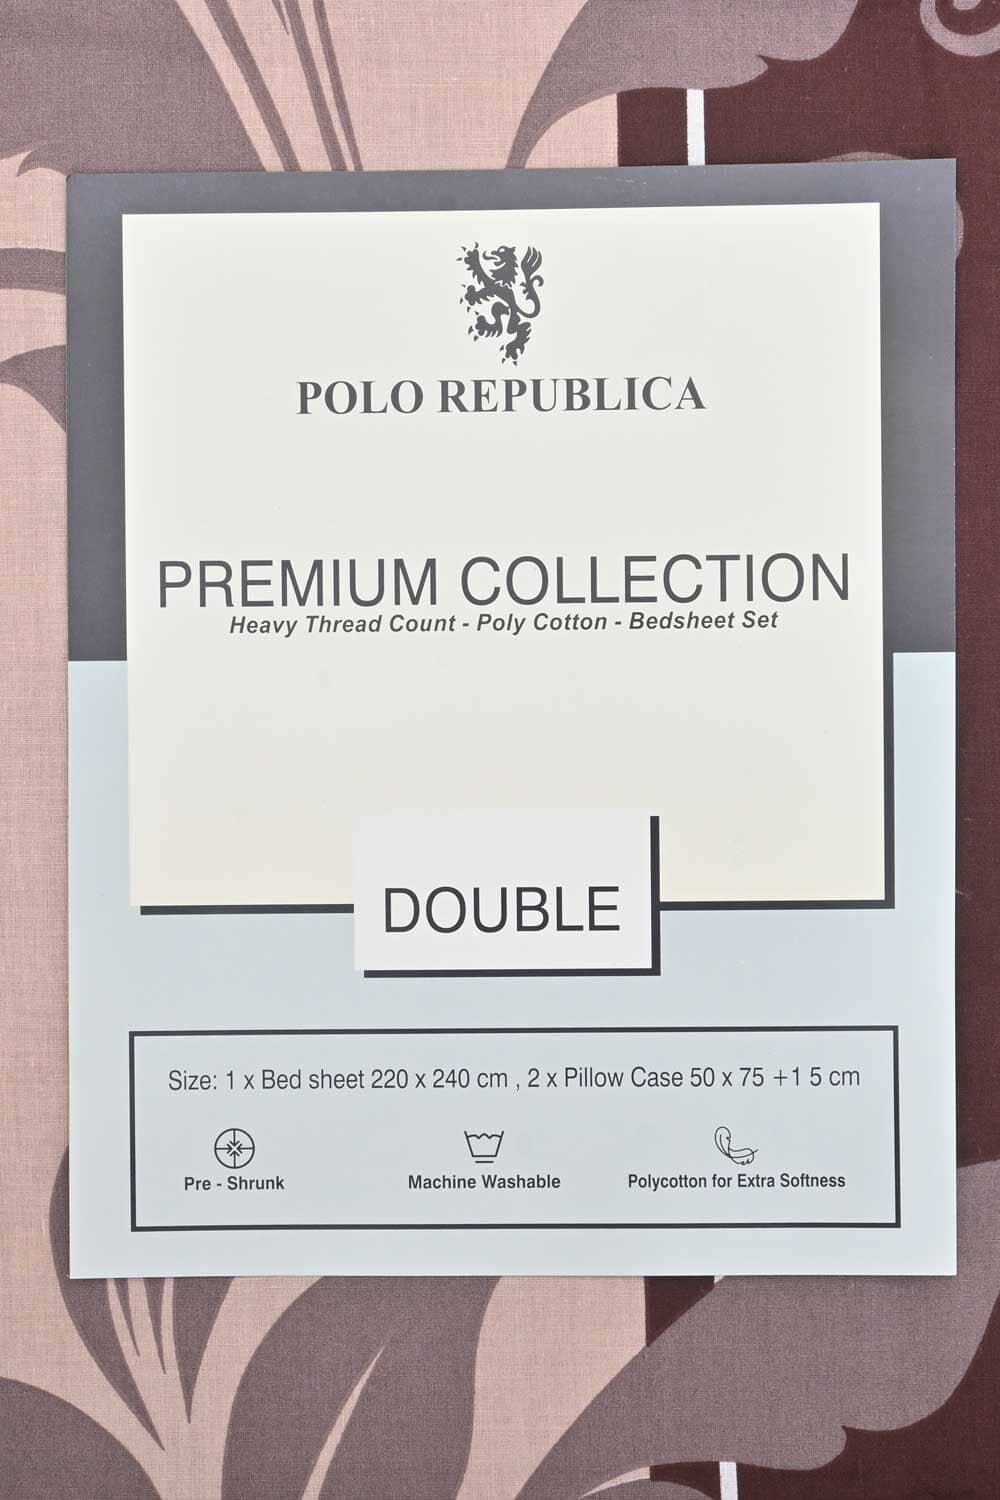 Polo Republica Pakkert Premium Collection 3 Piece Double Bed Sheet Bed Sheet Fiza 